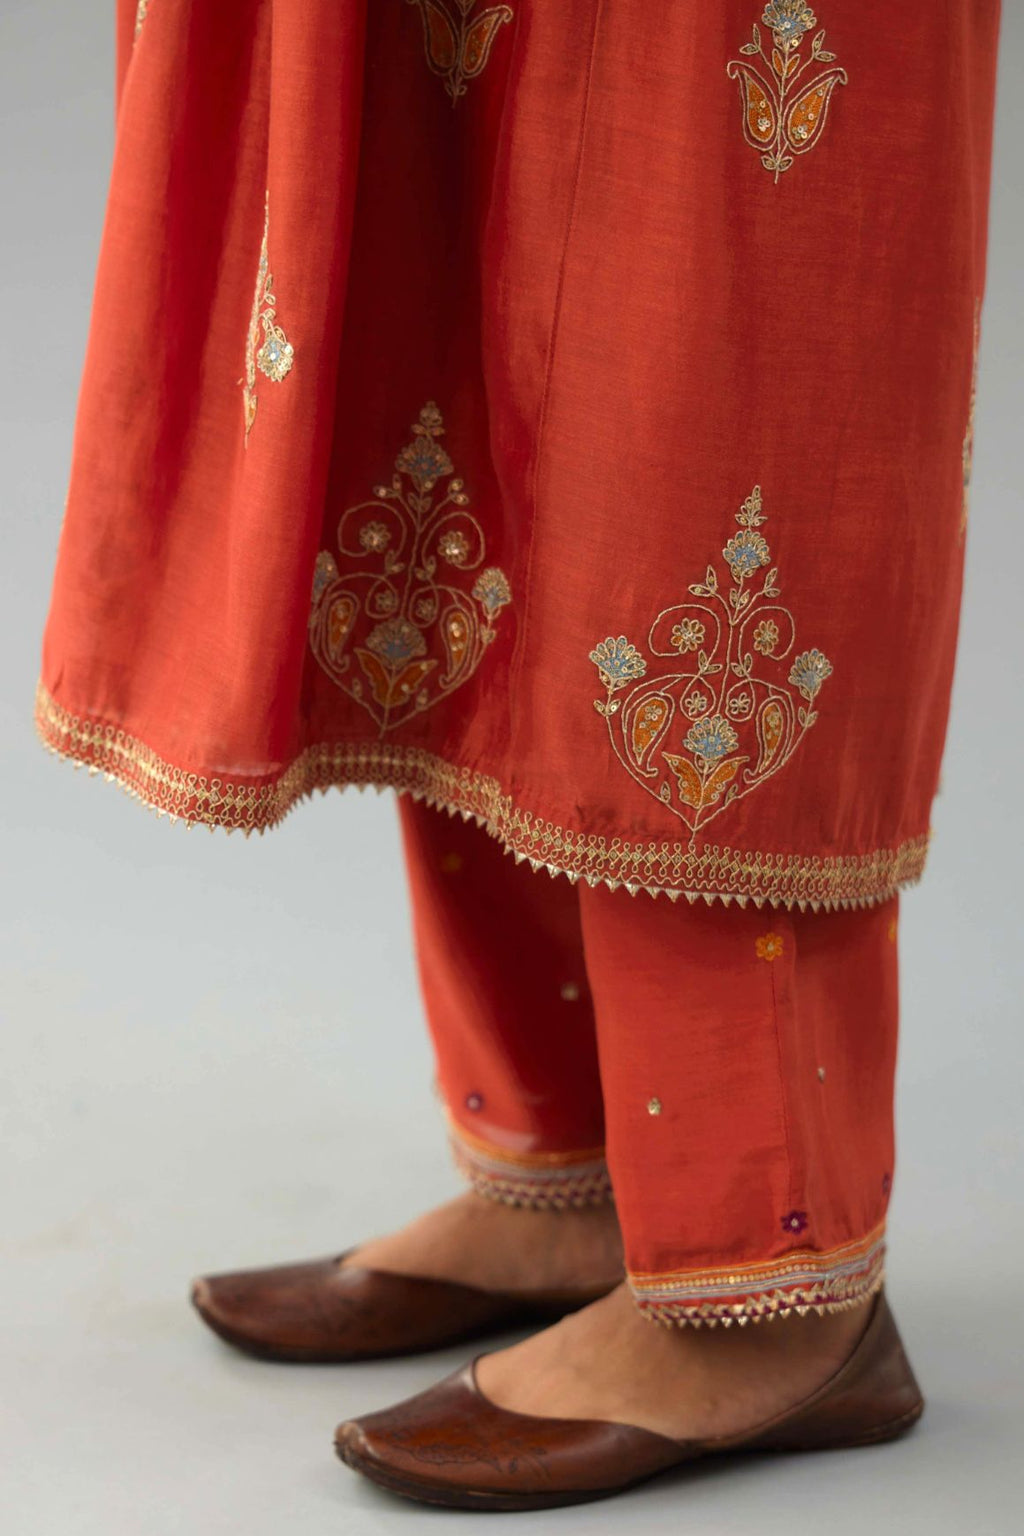 Rust silk chanderi kurta-dress set with all-over zari, dori and contrast silk thread embroidery, highlighted with gold sequins work.